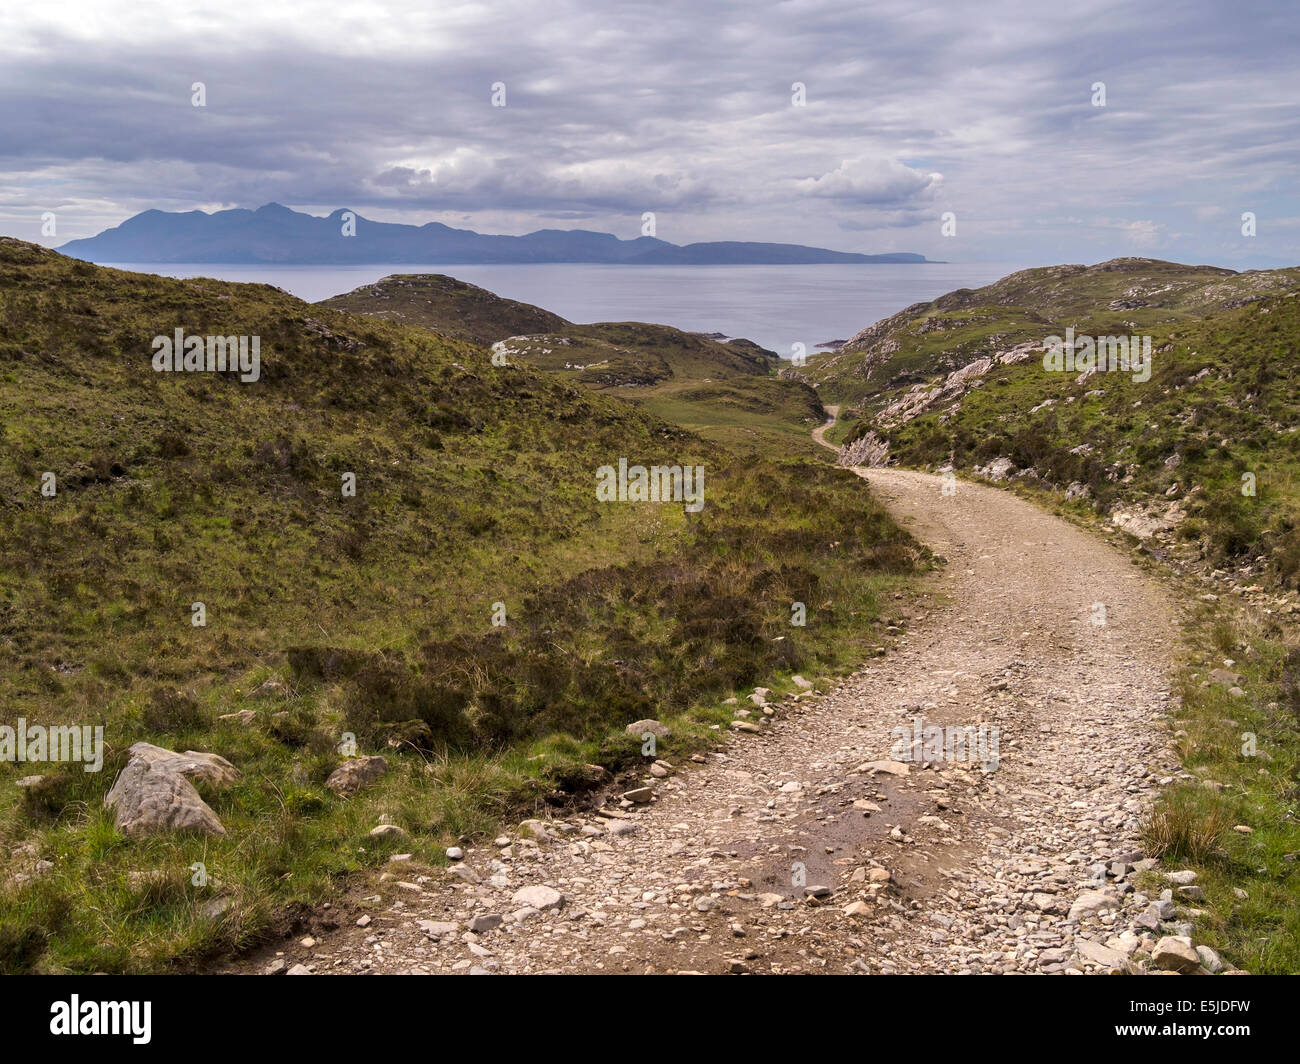 Dirt track road to the Point of Sleat with the Island of Rum in the distance, Skye, Scotland, UK Stock Photo